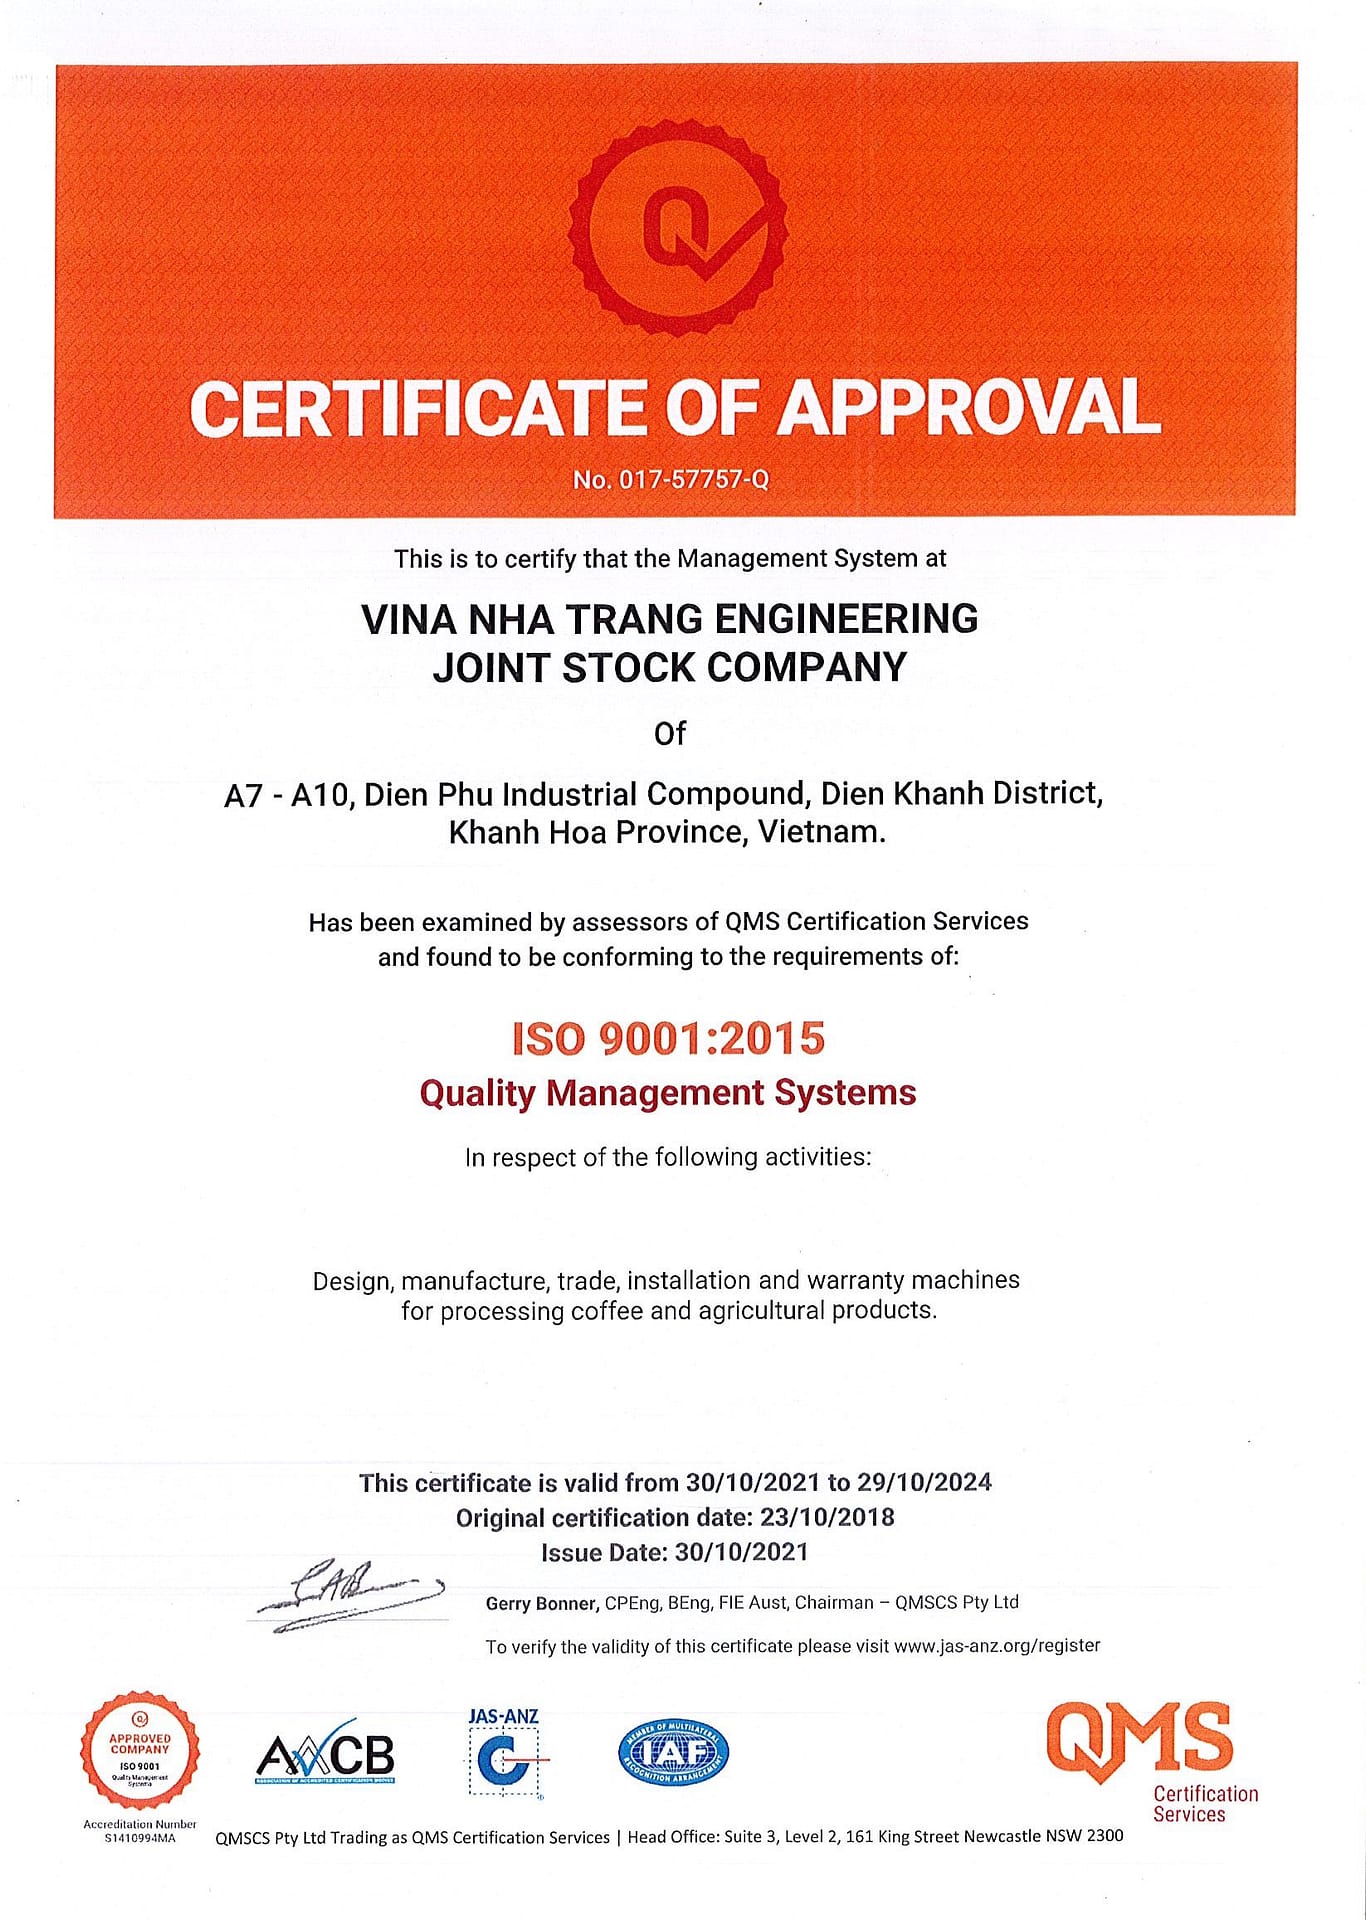 VNT's ISO 9001:2015 - in Design, manufacture, trade, installation, and warranty machines for processing coffee and agricultural products